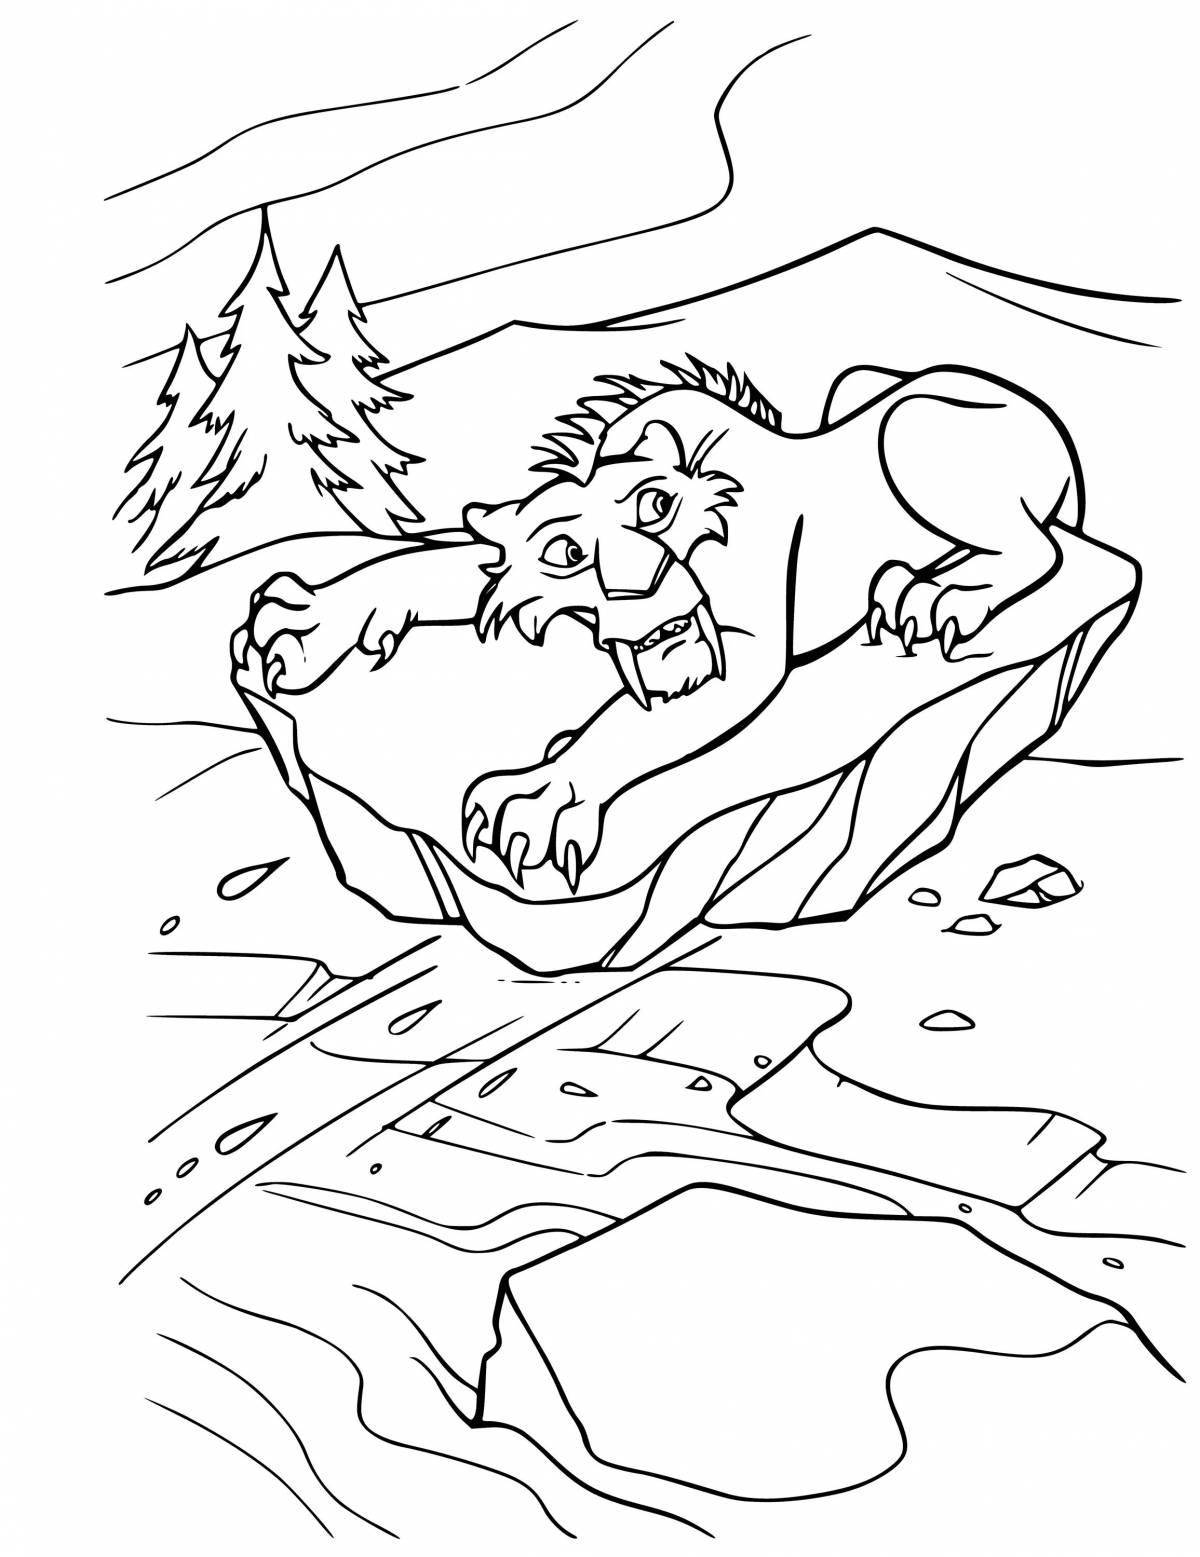 Diego Ice Age humorous coloring book